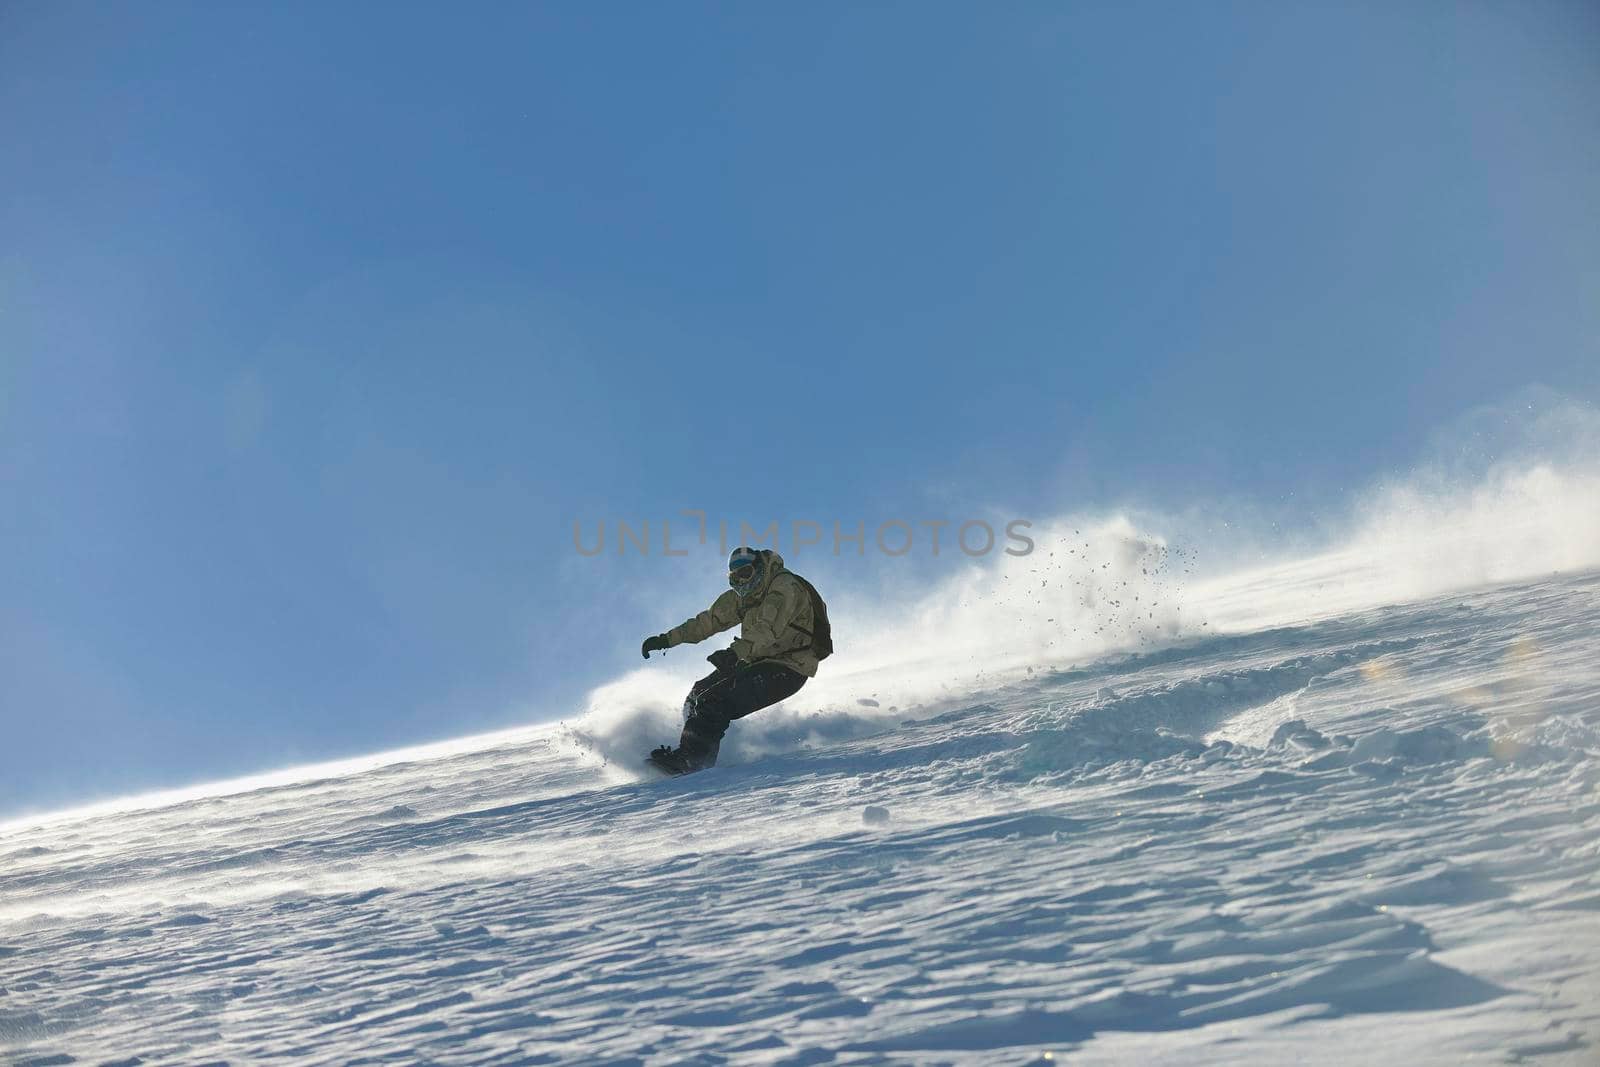 freestyle snowboarder jump and ride free style  at sunny winter day on mountain